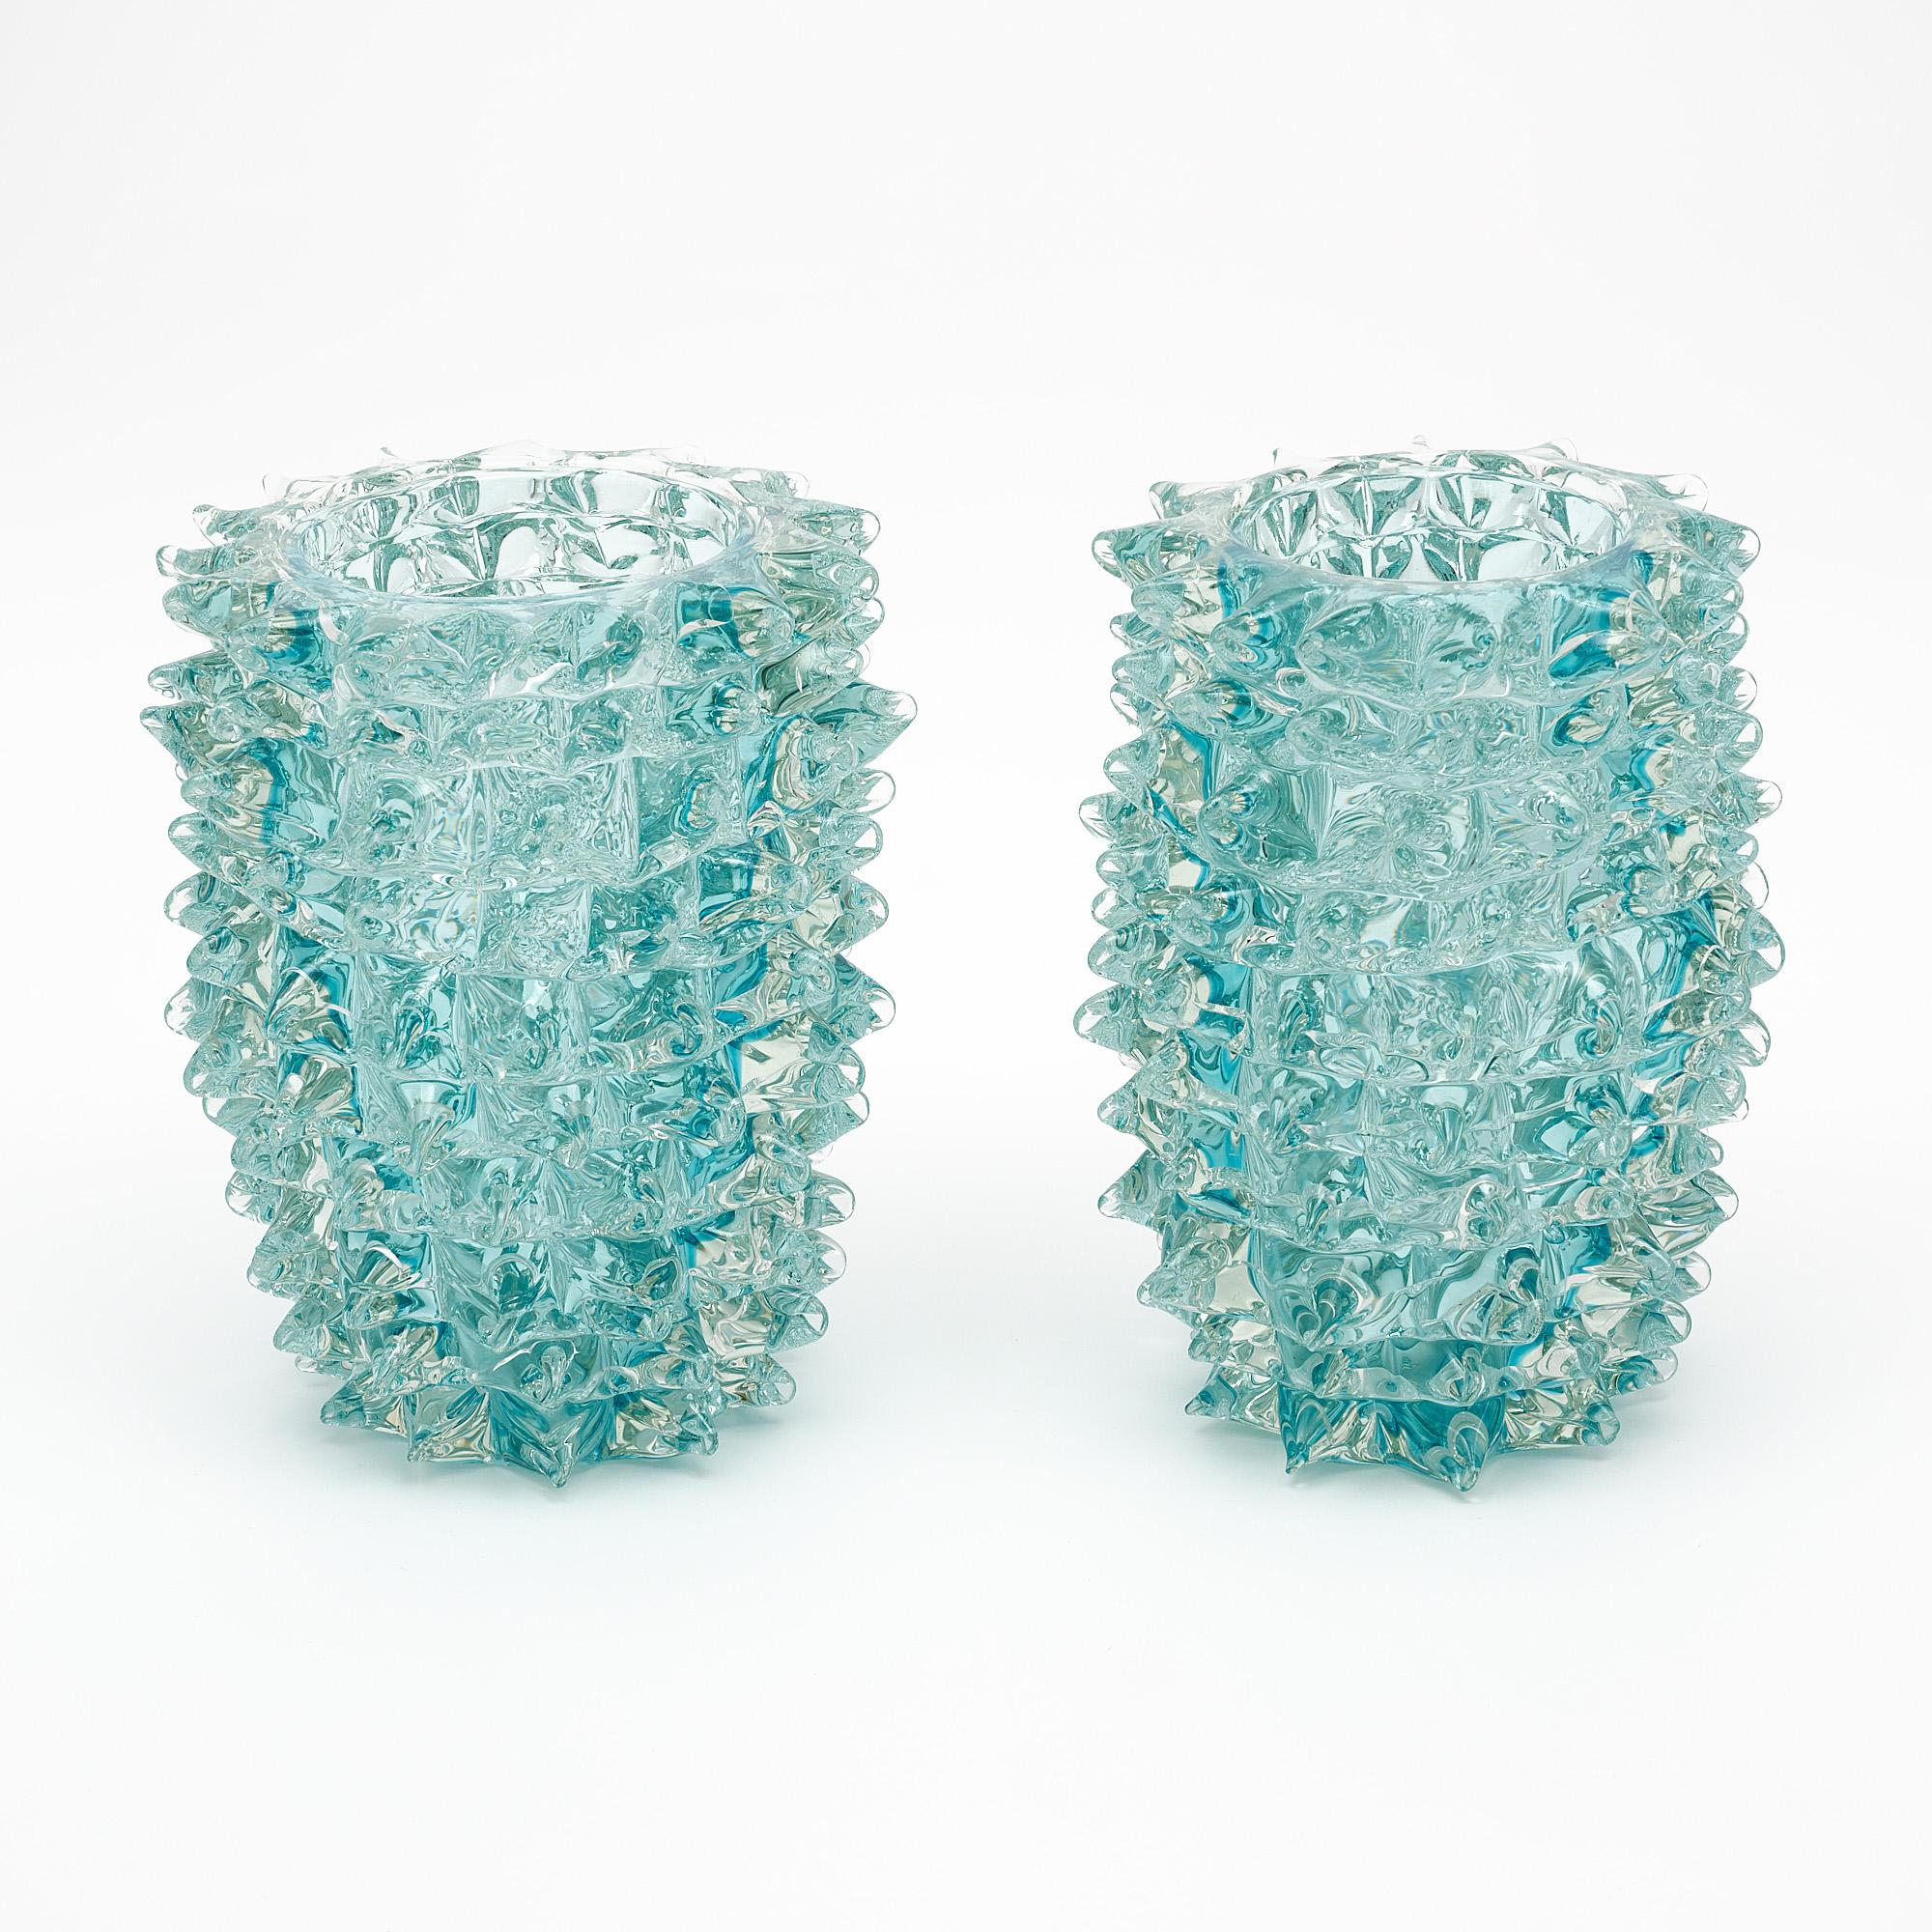 Pair of Italian Murano glass vases, in Aqua color, crafted in the “rostrate” technique, in the manner of iconic Murano glass powerhouse “Barovier